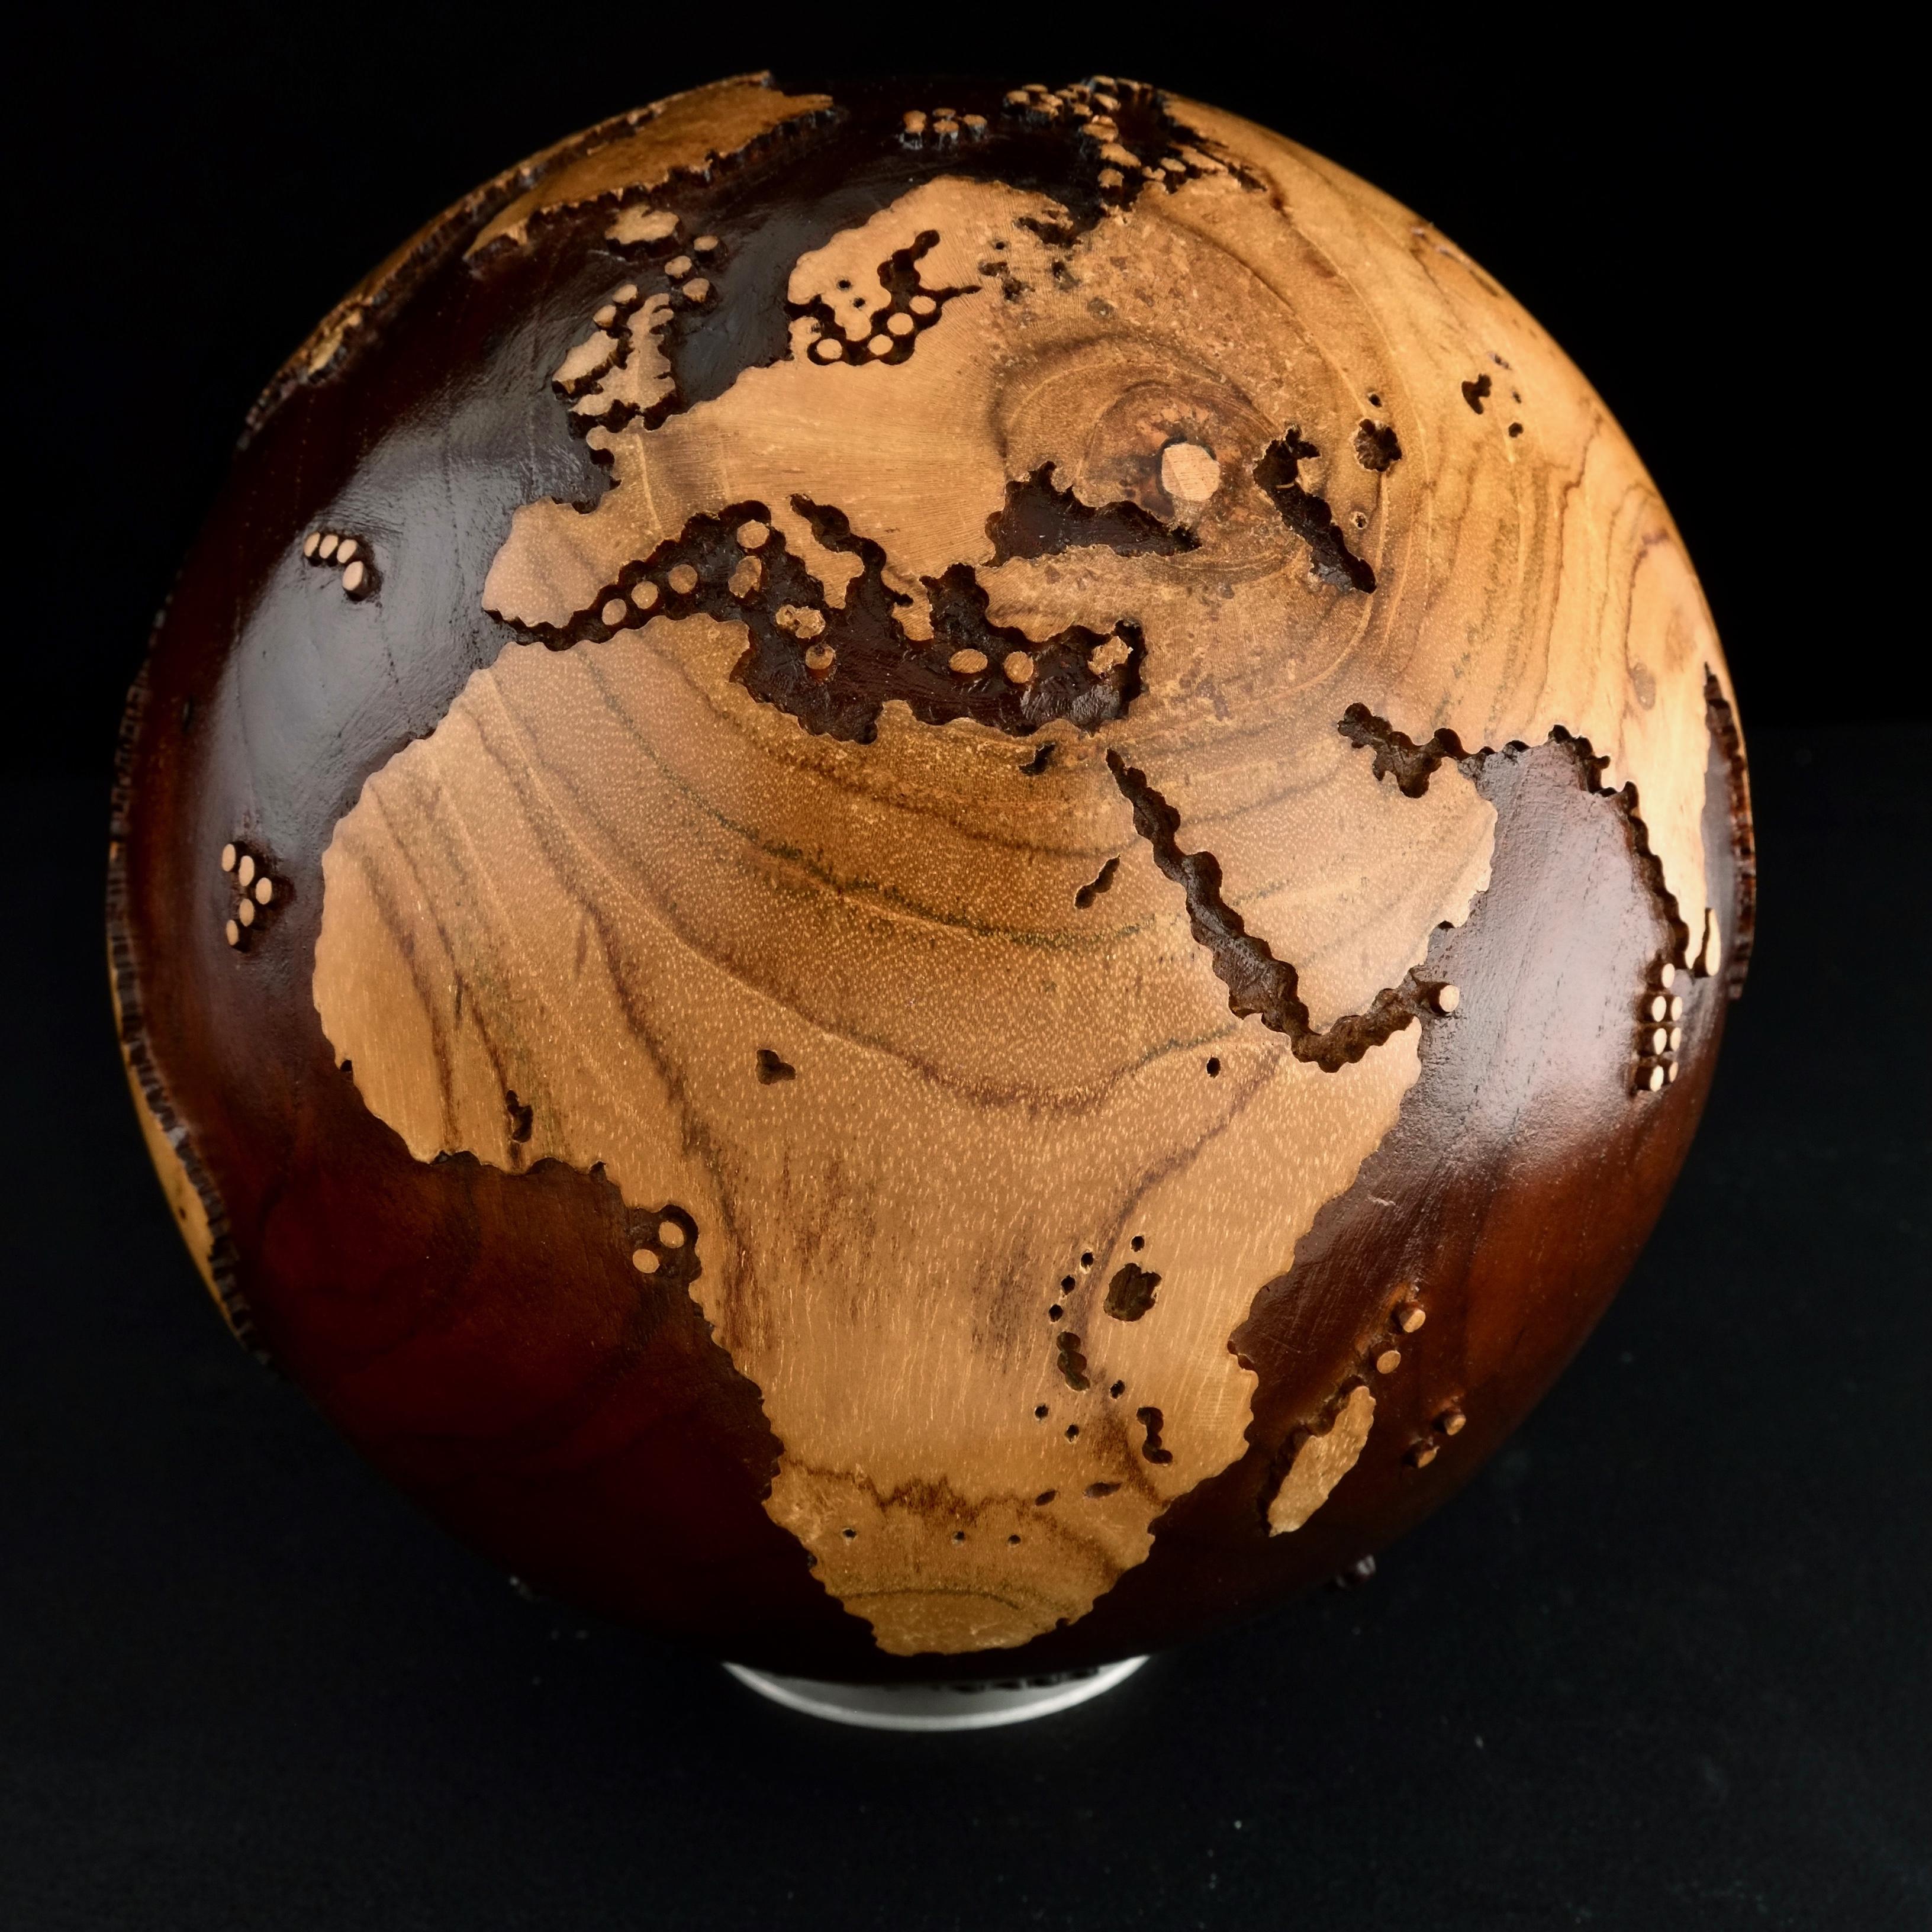 Walnut stain makes this beautiful turning globe a real stunning sculpture.
Made from a whole piece of wood the way the sculpture is shaped is defined by how the tree grew.
Sitting on a turning base the sculpture can spin silently around, so that all